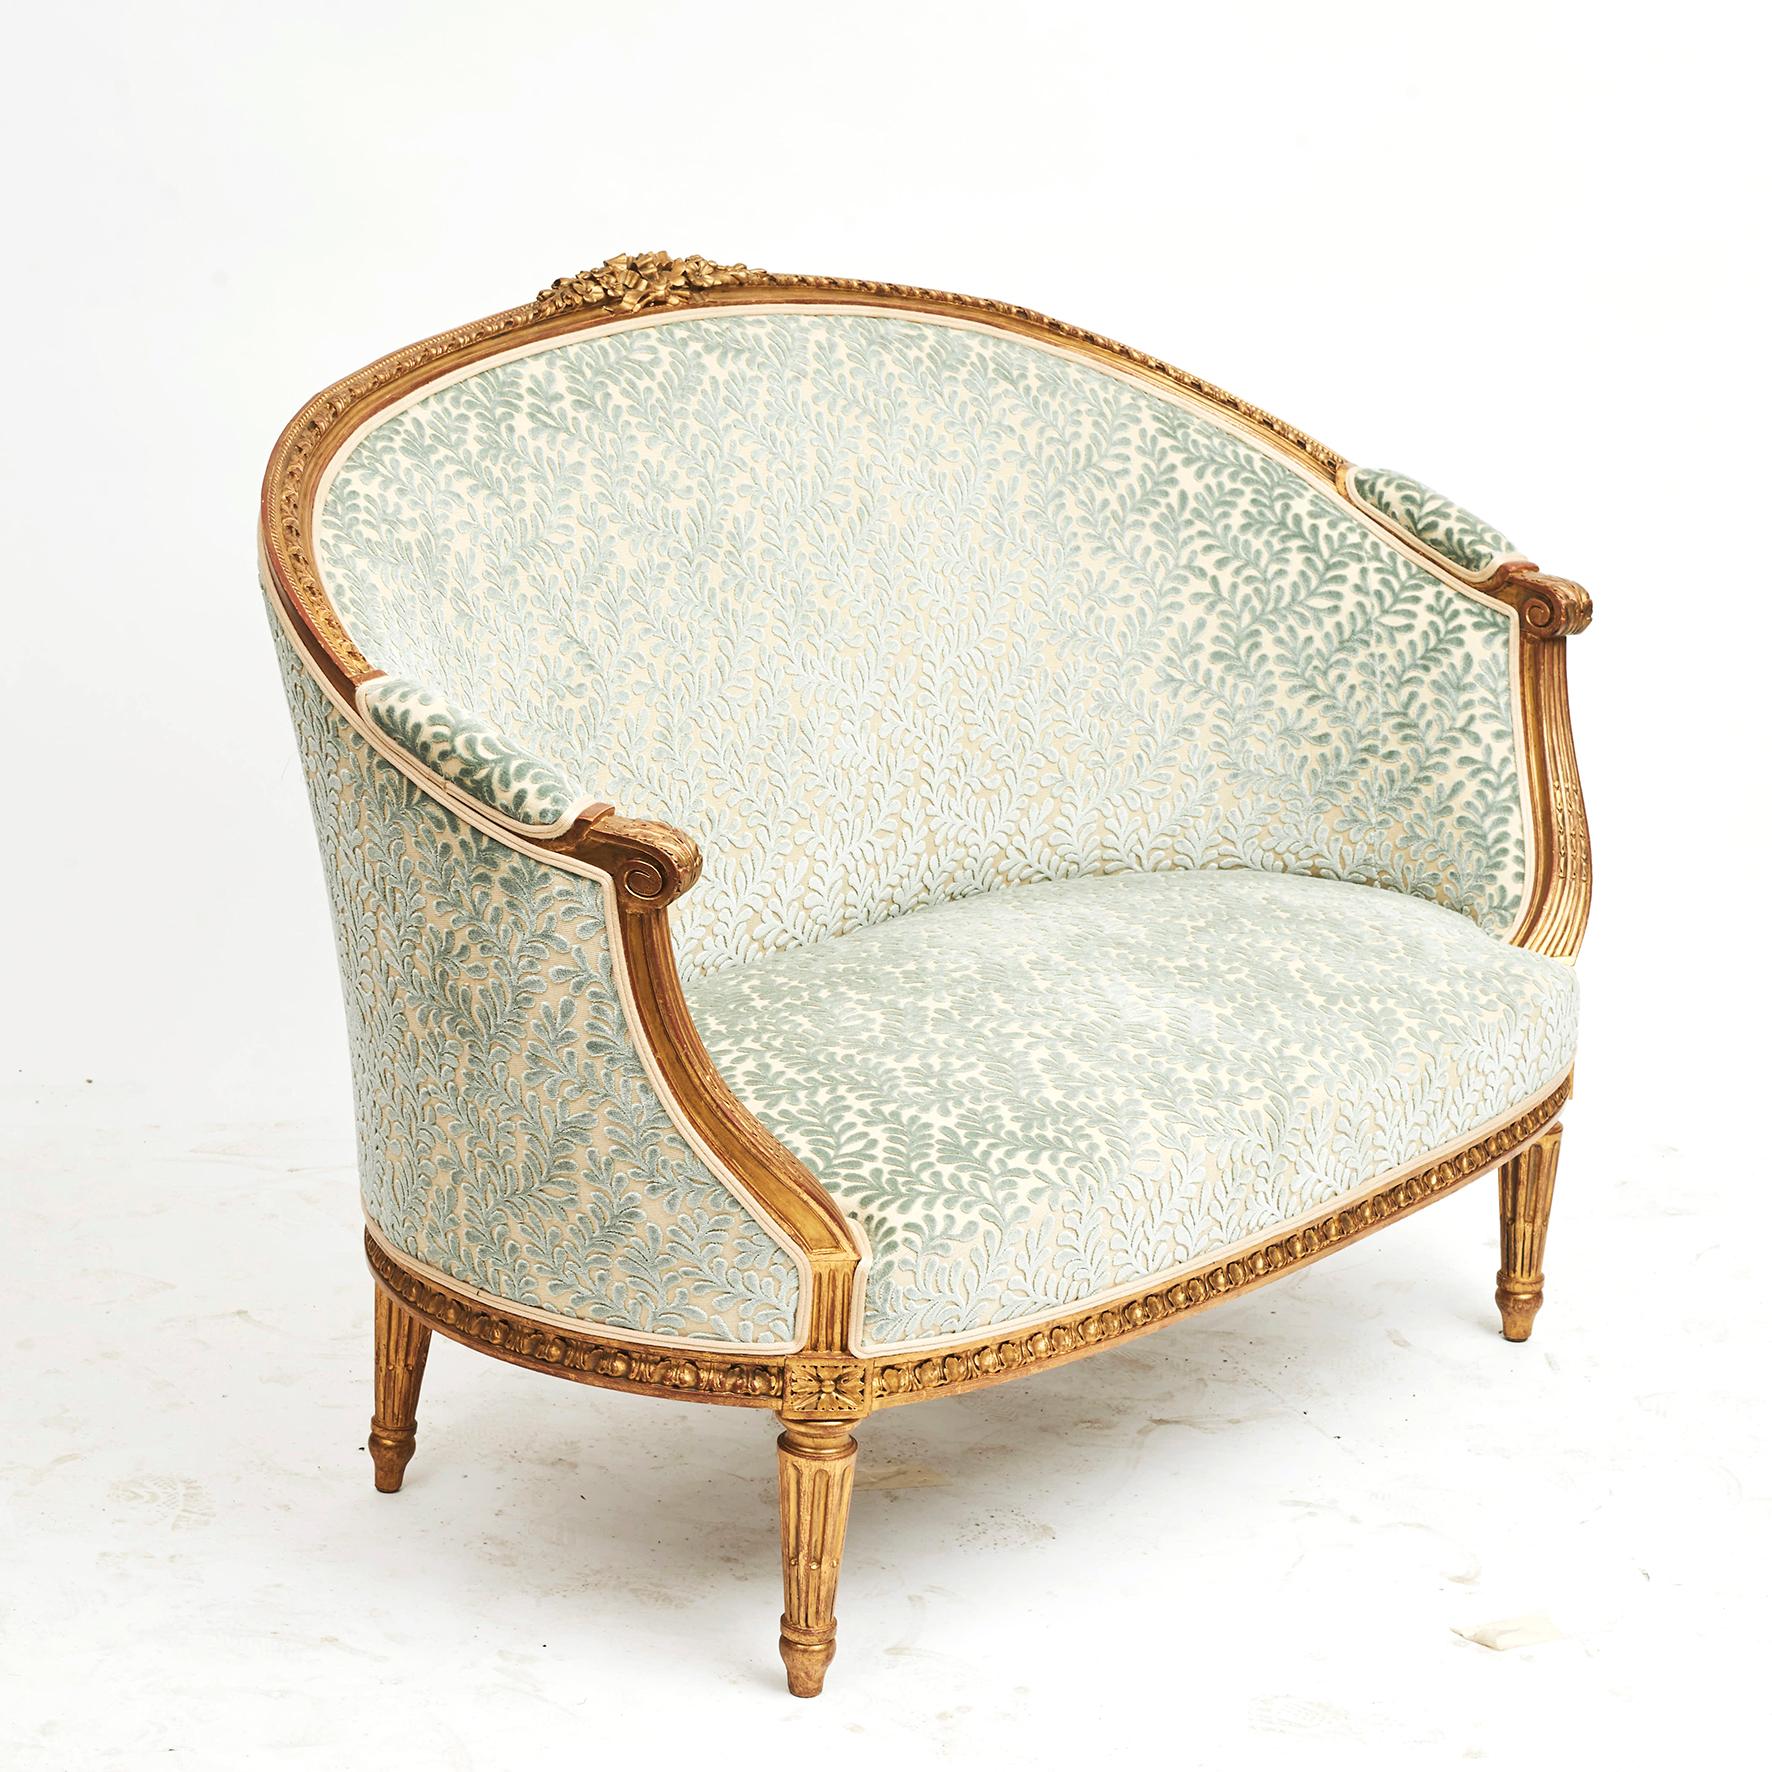 French Canapé sofa in Louis XVI style, circa 1860.
Original hand carved giltwood. Age-related patina.
Newly upholstered with Aquamarin fabric from Colefax & Fowler.